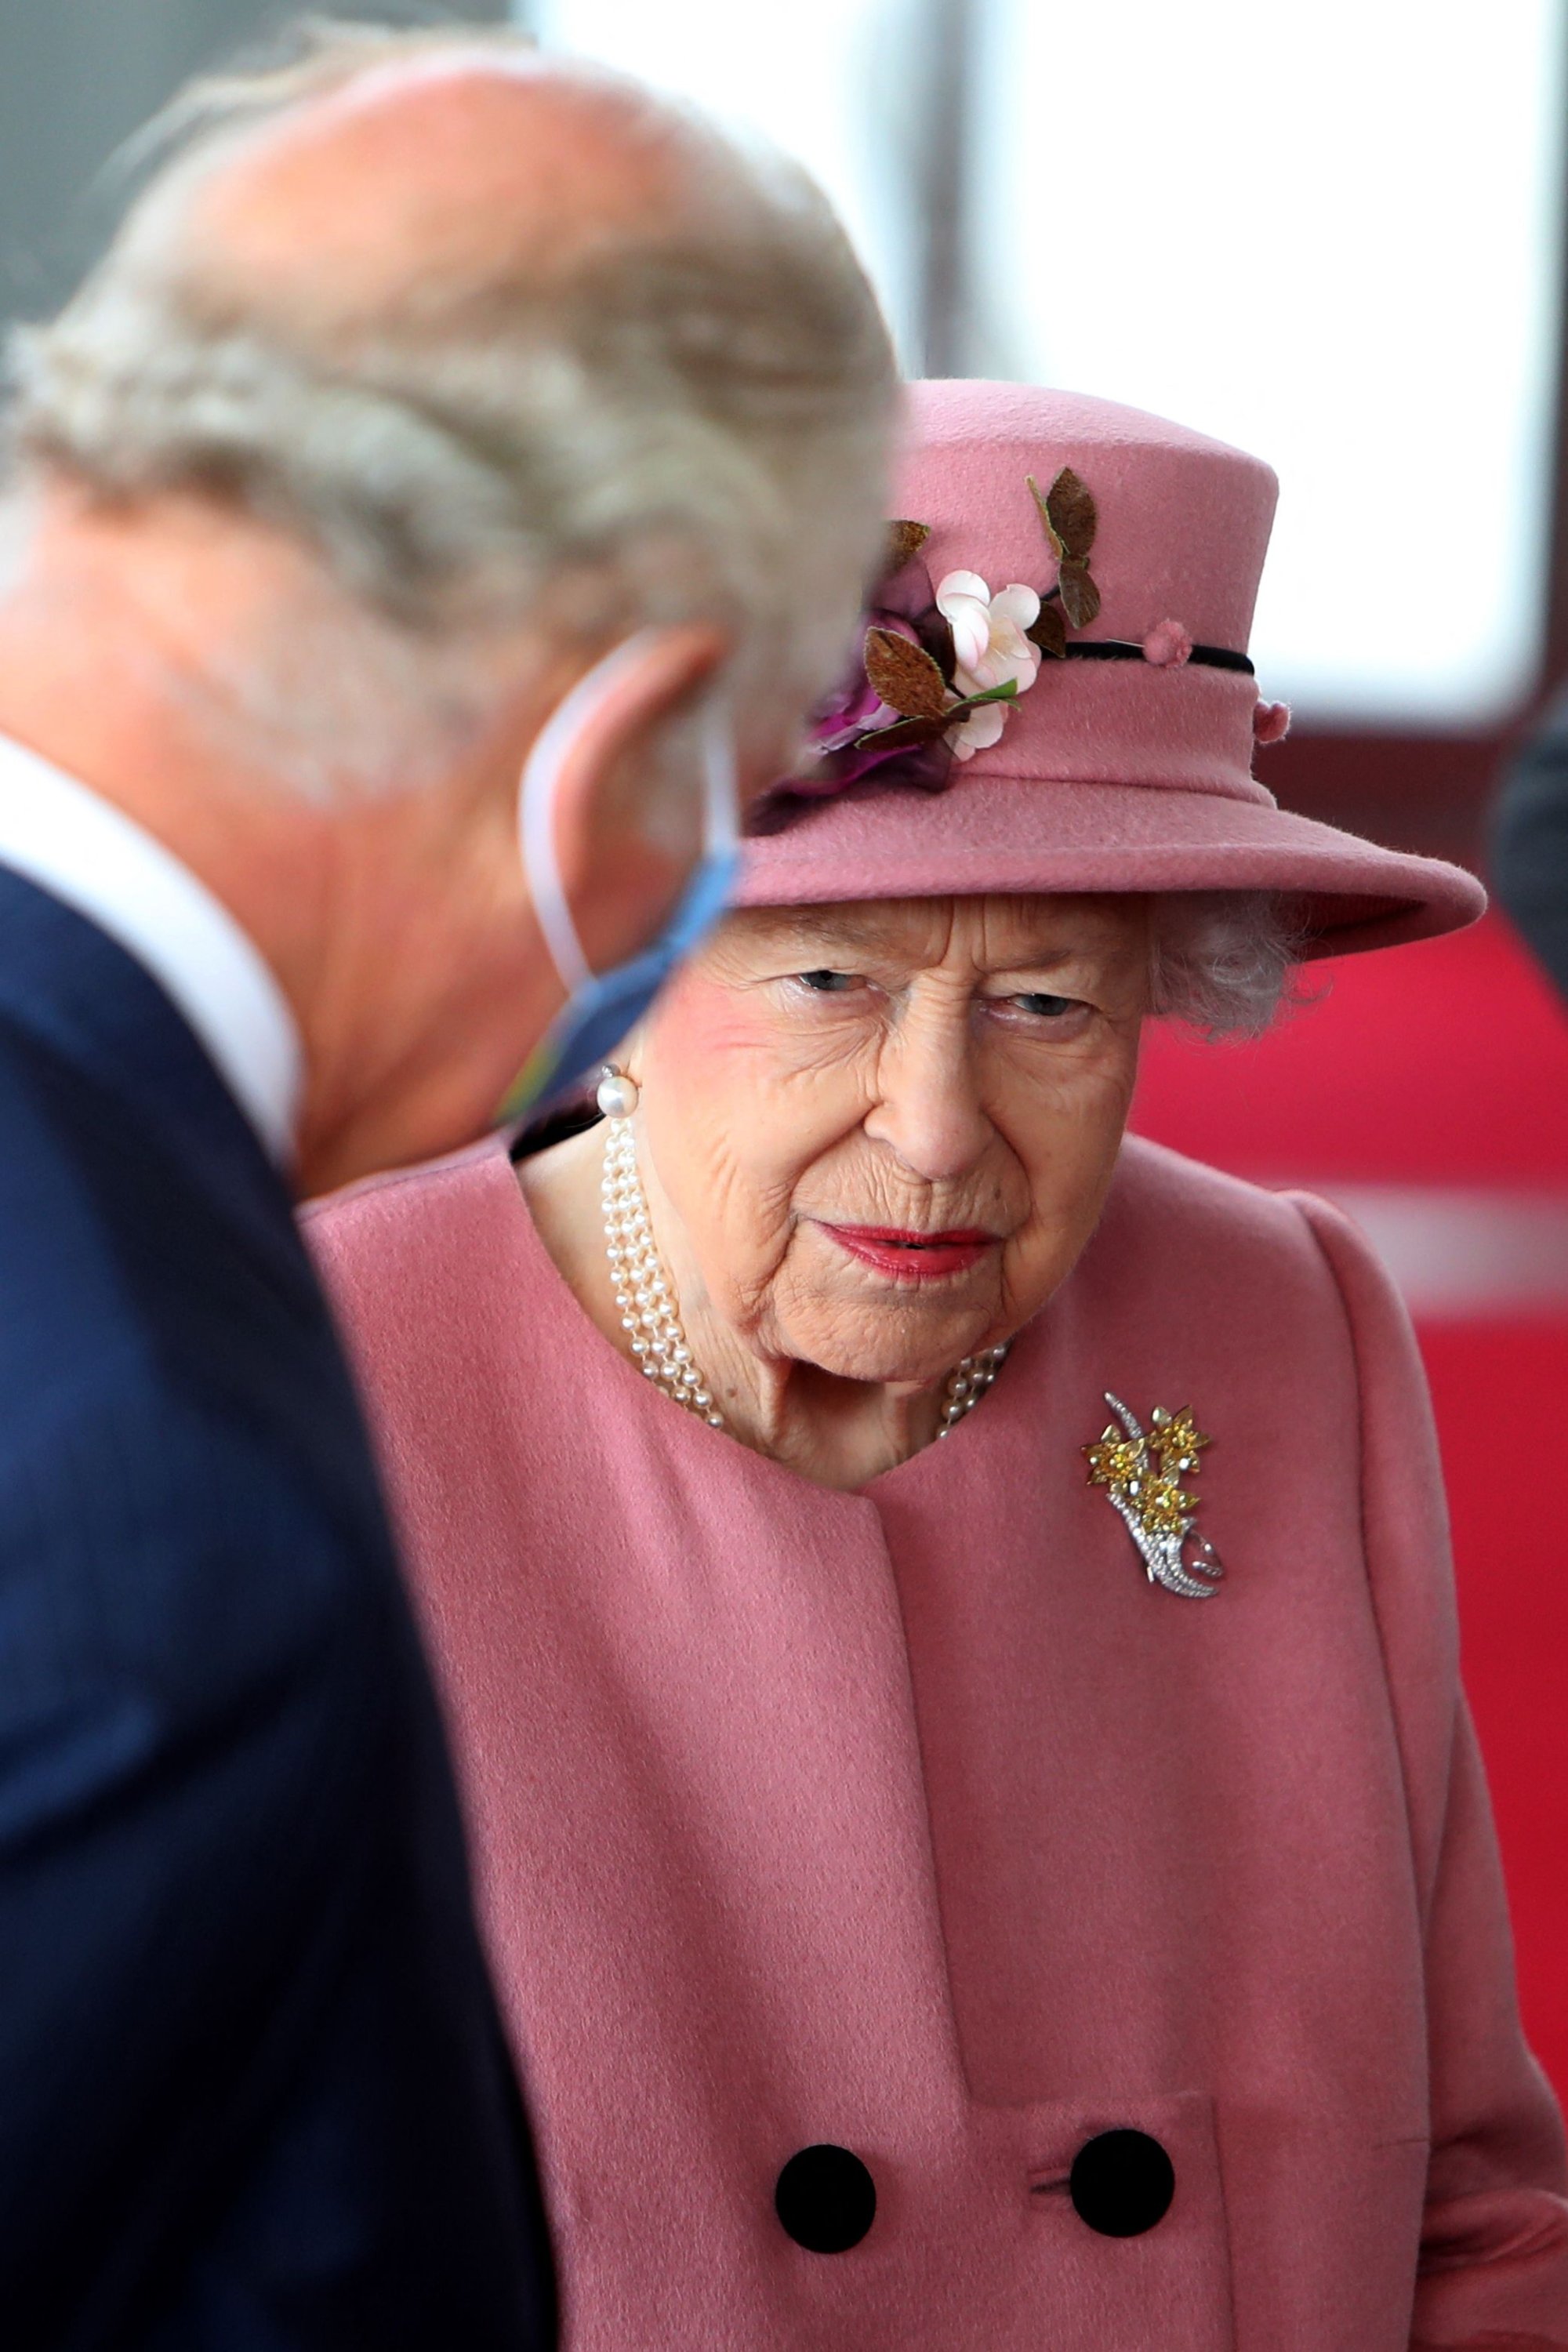 Britain's Queen Elizabeth II speaks with Britain's Prince Charles on her arrival to attend the ceremonial opening of the sixth Senedd, in Cardiff, Wales, Oct. 14, 2021. (AFP Photo)